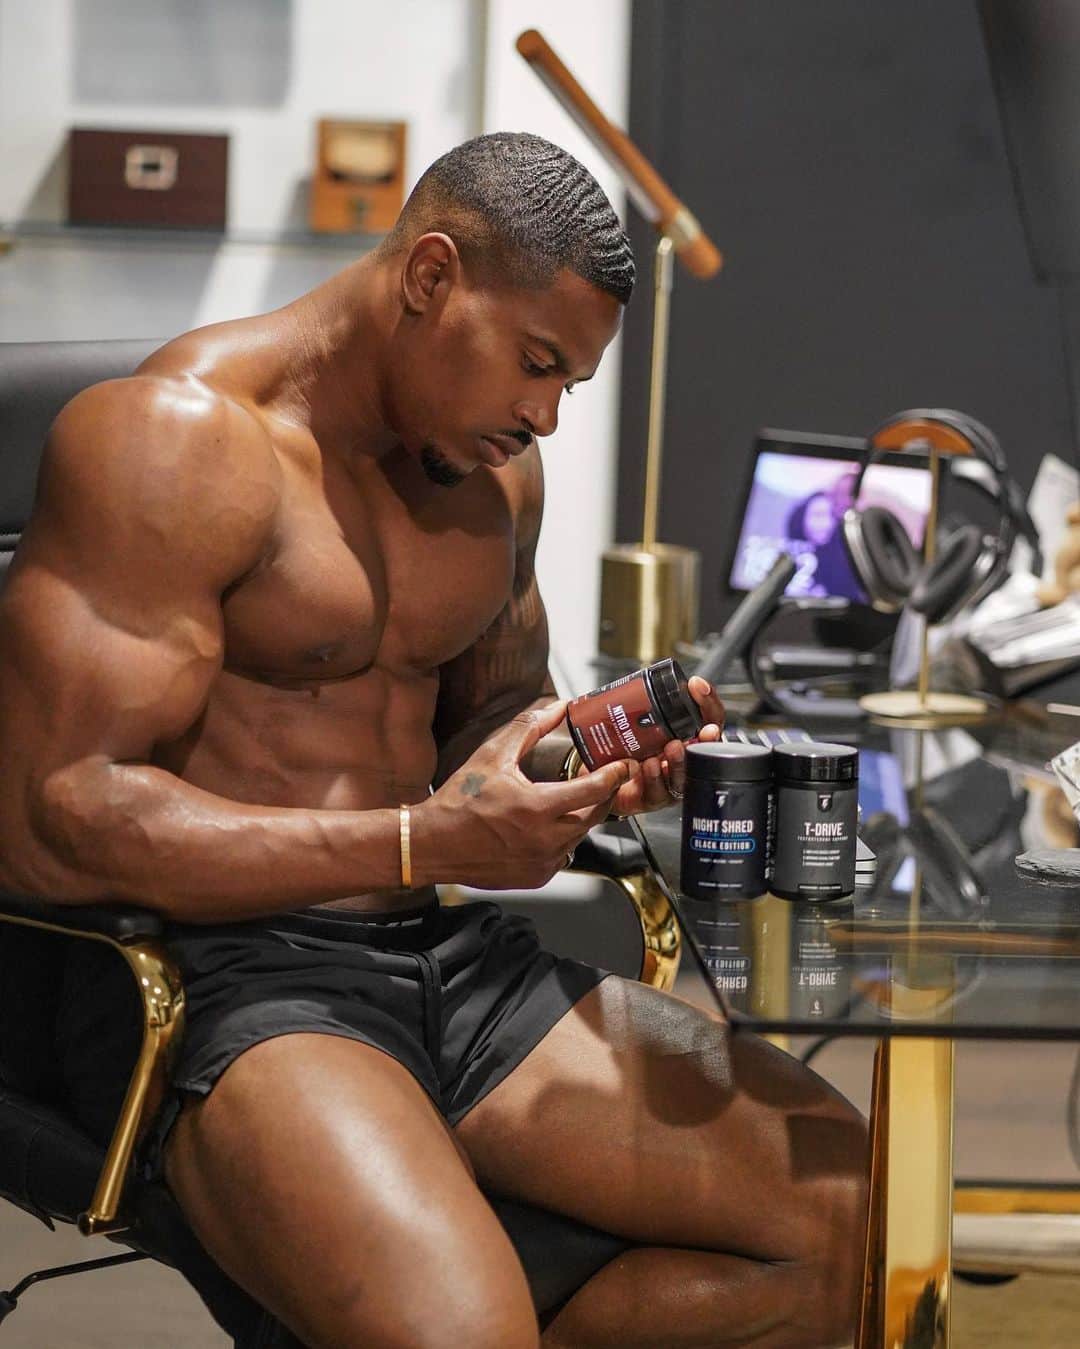 Simeon Pandaのインスタグラム：「Amplify your energy with the @innosupps Supercharged Male Stack triple threat 🔥  ✔️ Improved circulation which can help enhance your performance  ✔️ Improved stamina and energy levels and enhance blood flow  ✔️ Quality sleep and recovery are essential for vitality. Maximise your body’s ability to sleep deeper, longer.  Head to Innosupps.com to find out more @innosupps」